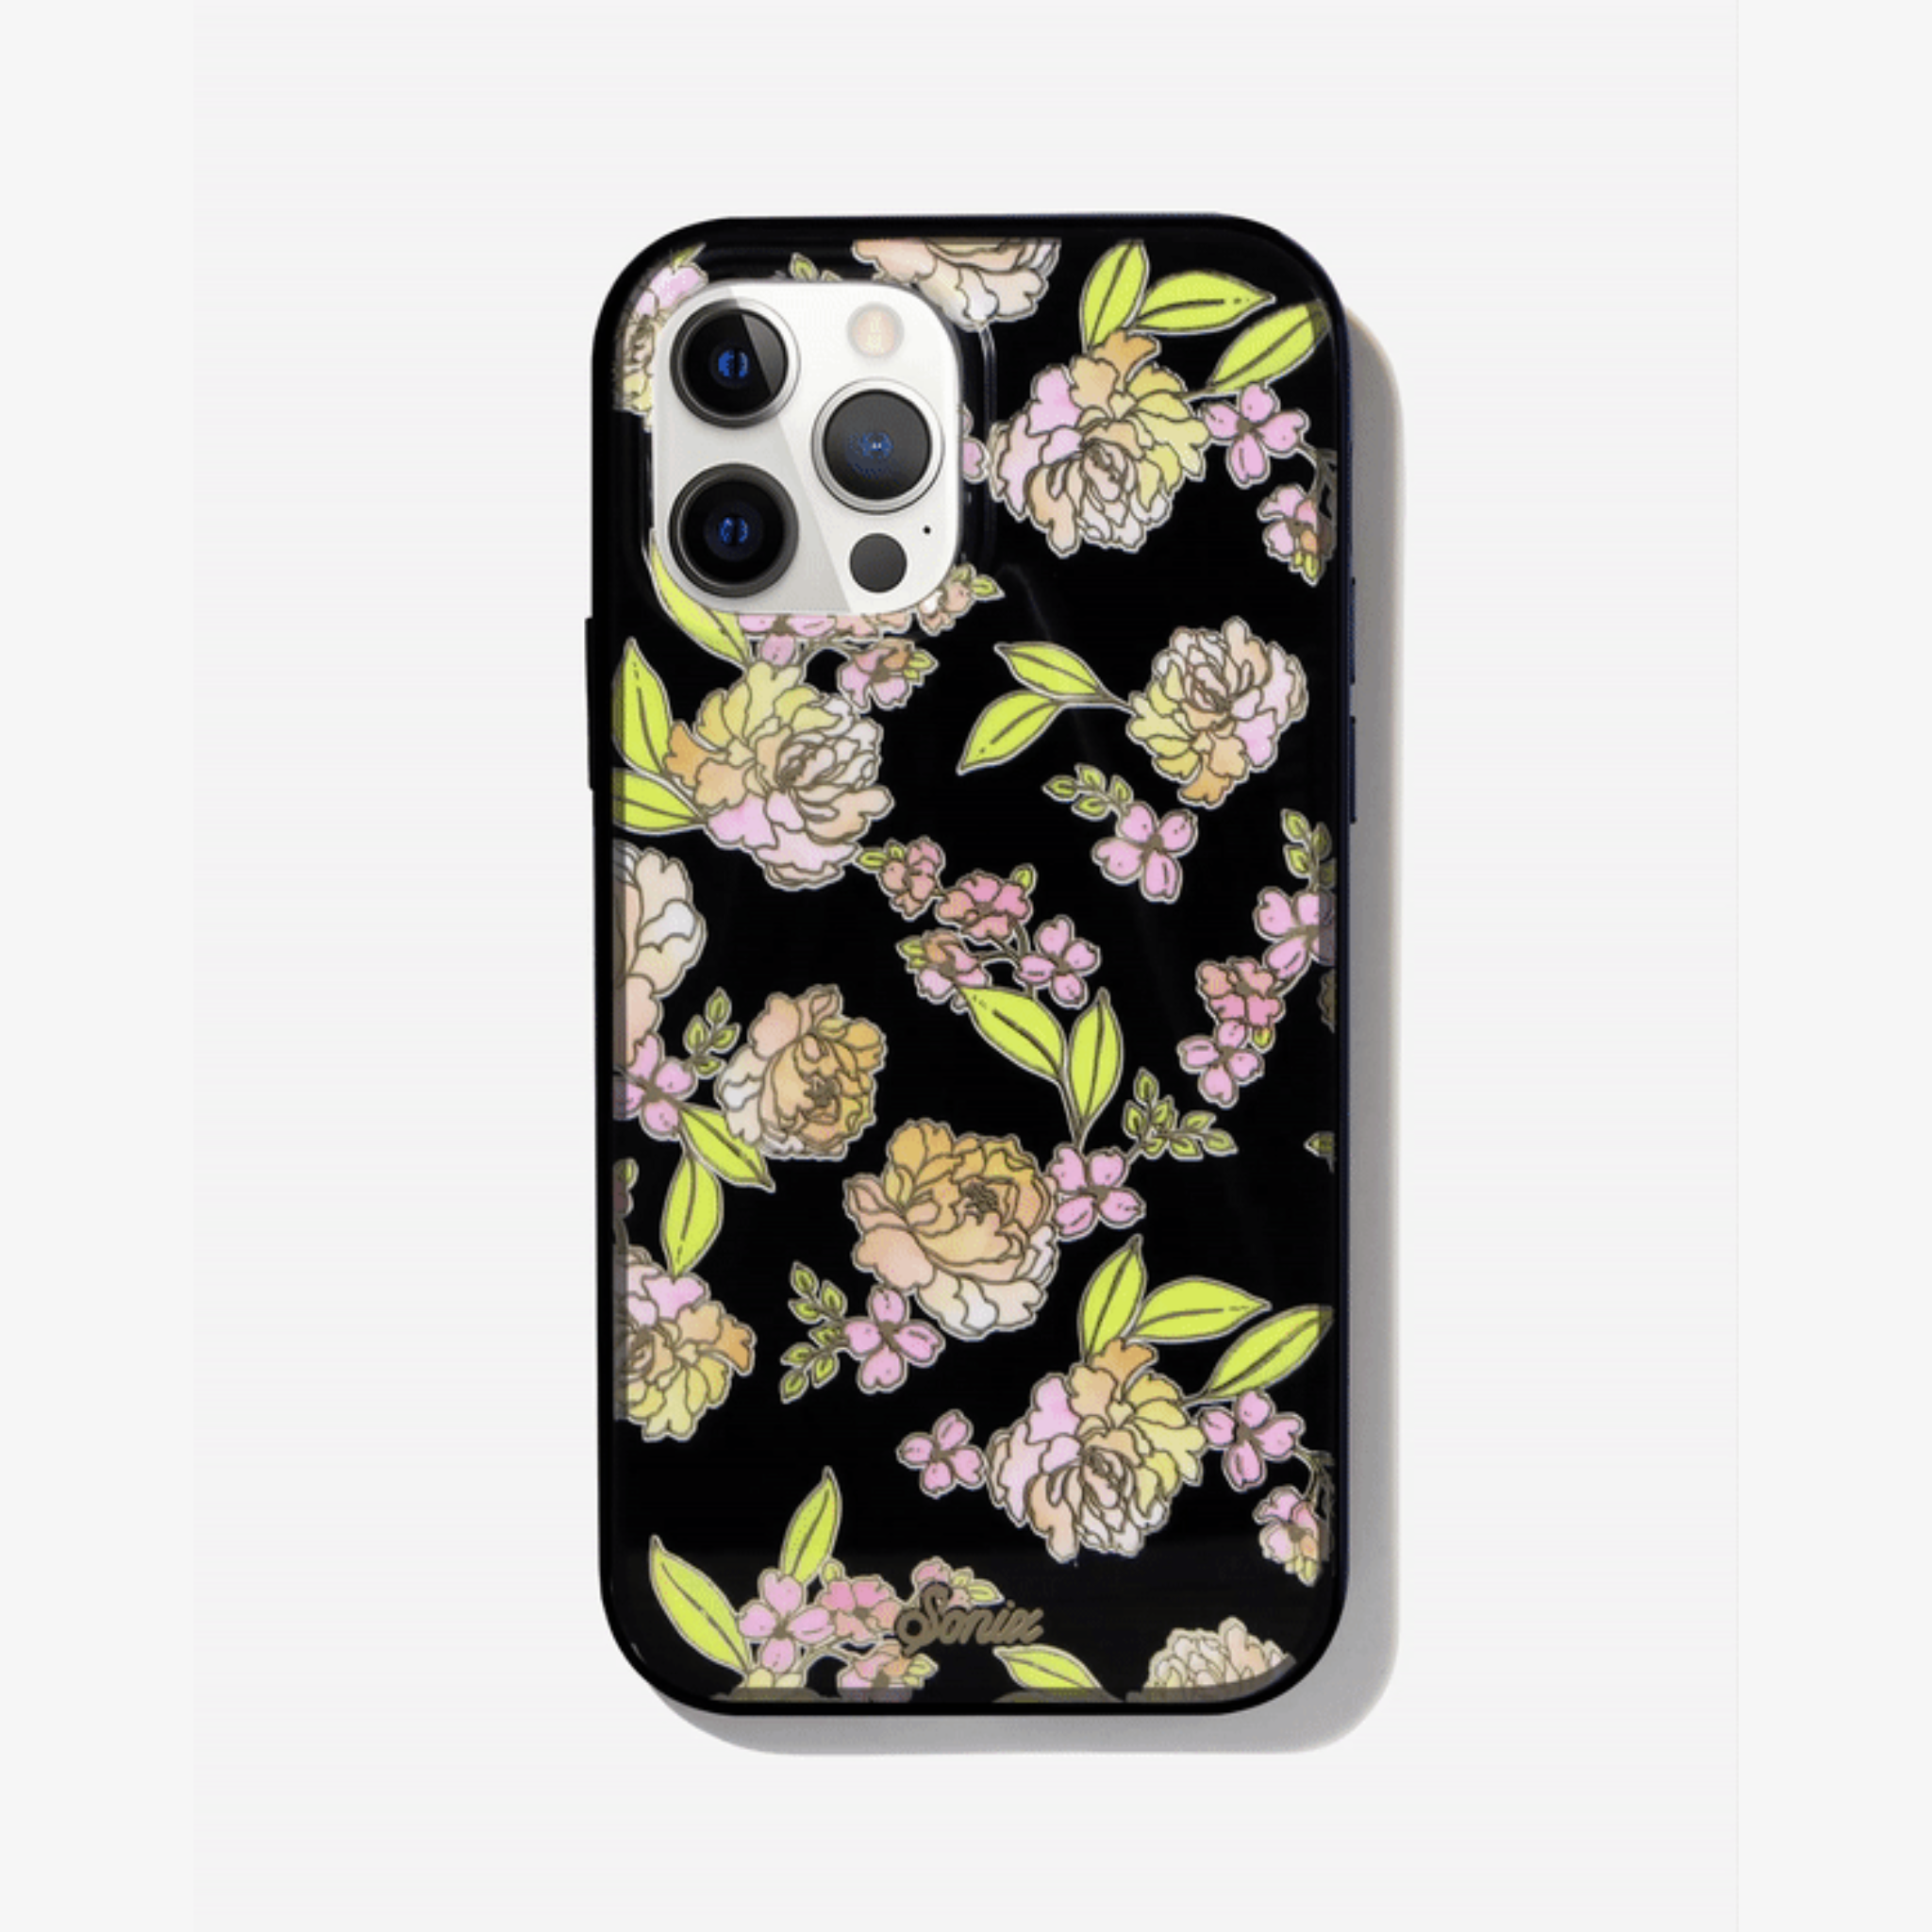 Black, iPhone case features a black base, gold foil details, and dainty flowers on an iphone 12 pro